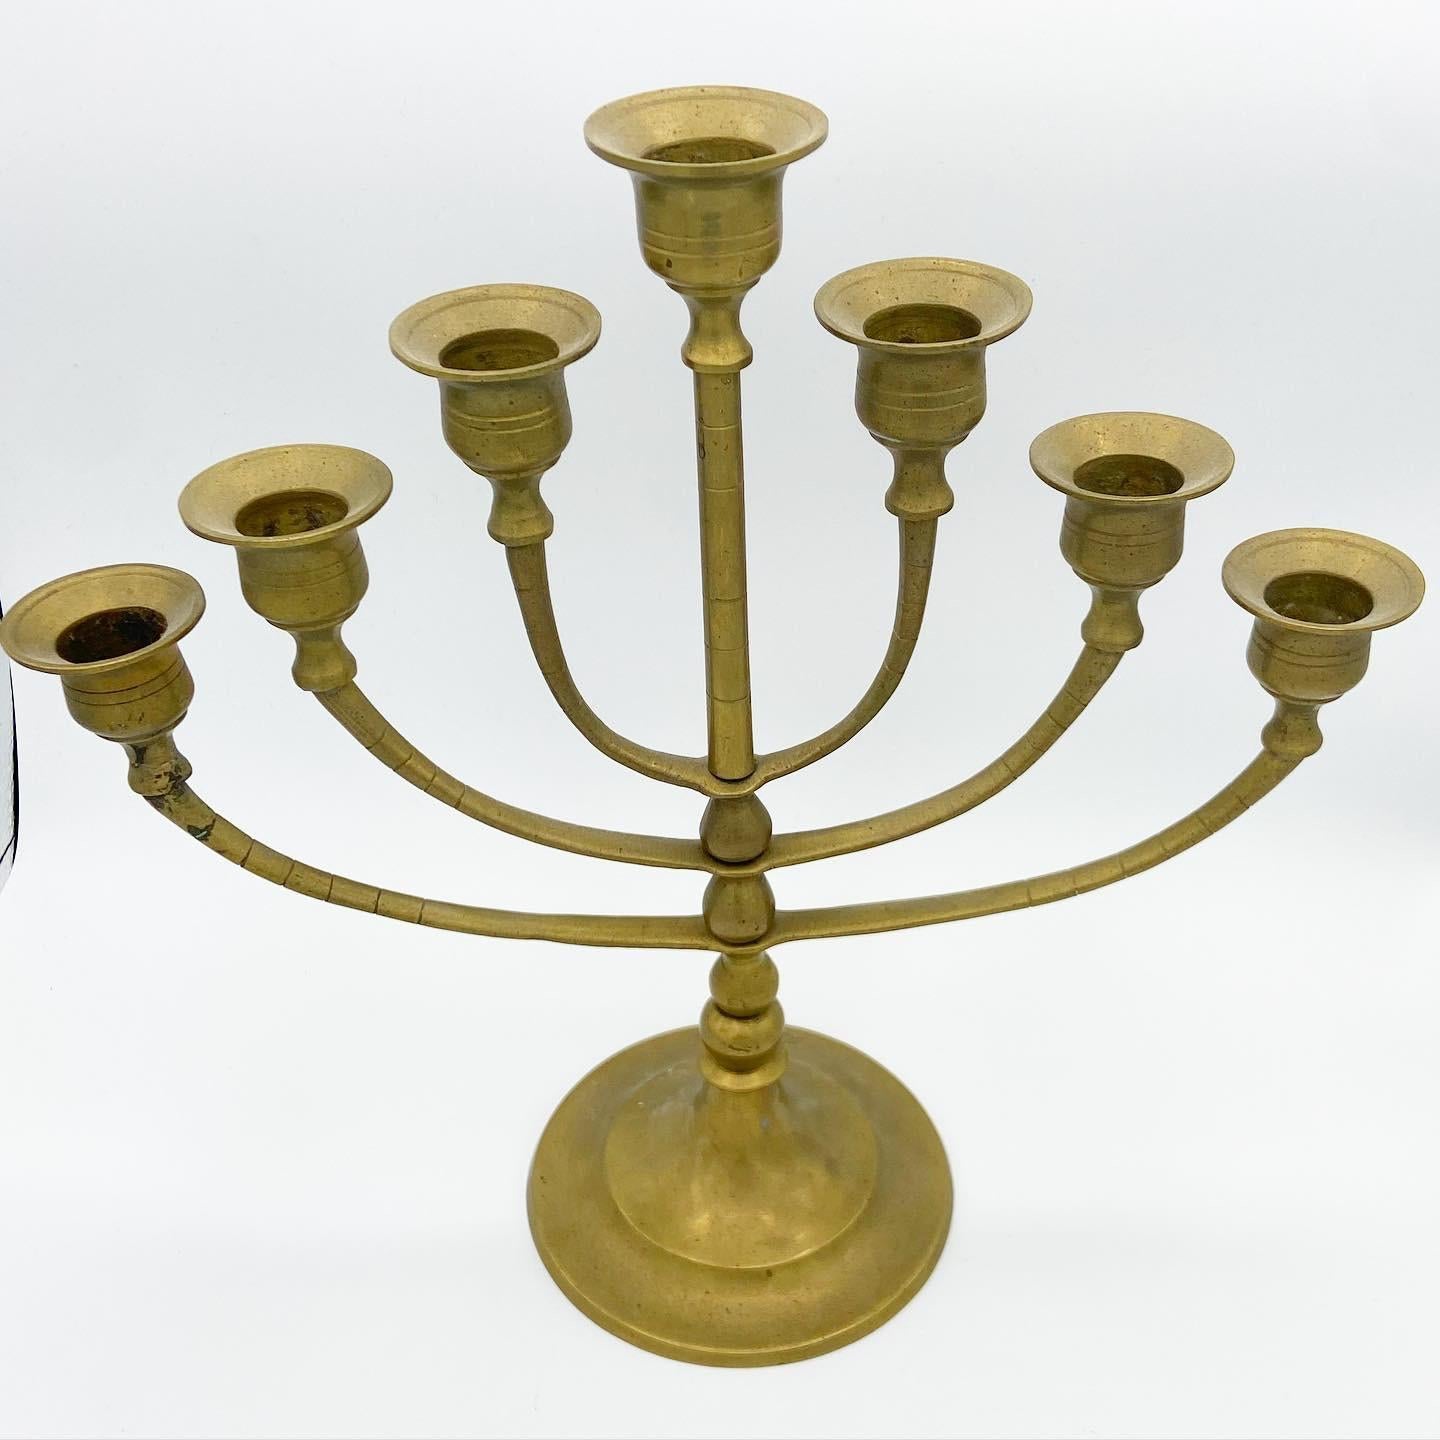 Beautiful brass candelabra with 7 candlestick holders.

Additional information: 
Material: Brass
Color: Brass
Style: Boho Chic
Time period: early 20th century
Dimension: 11.75